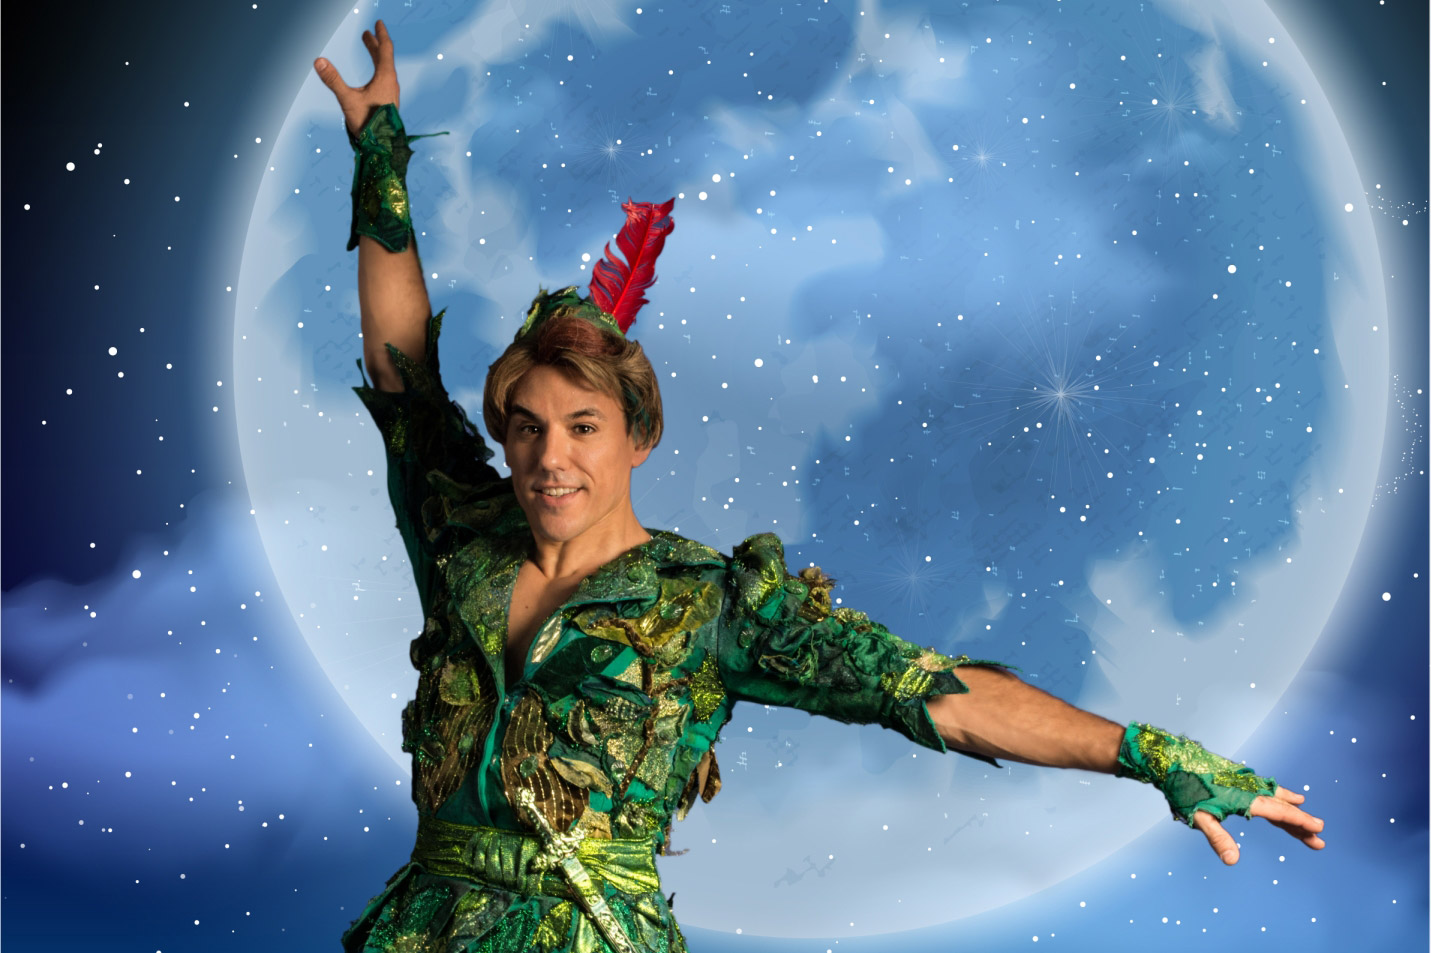 Peter Pan The Musical at Canal Walk Theatre | CapeTown ETC